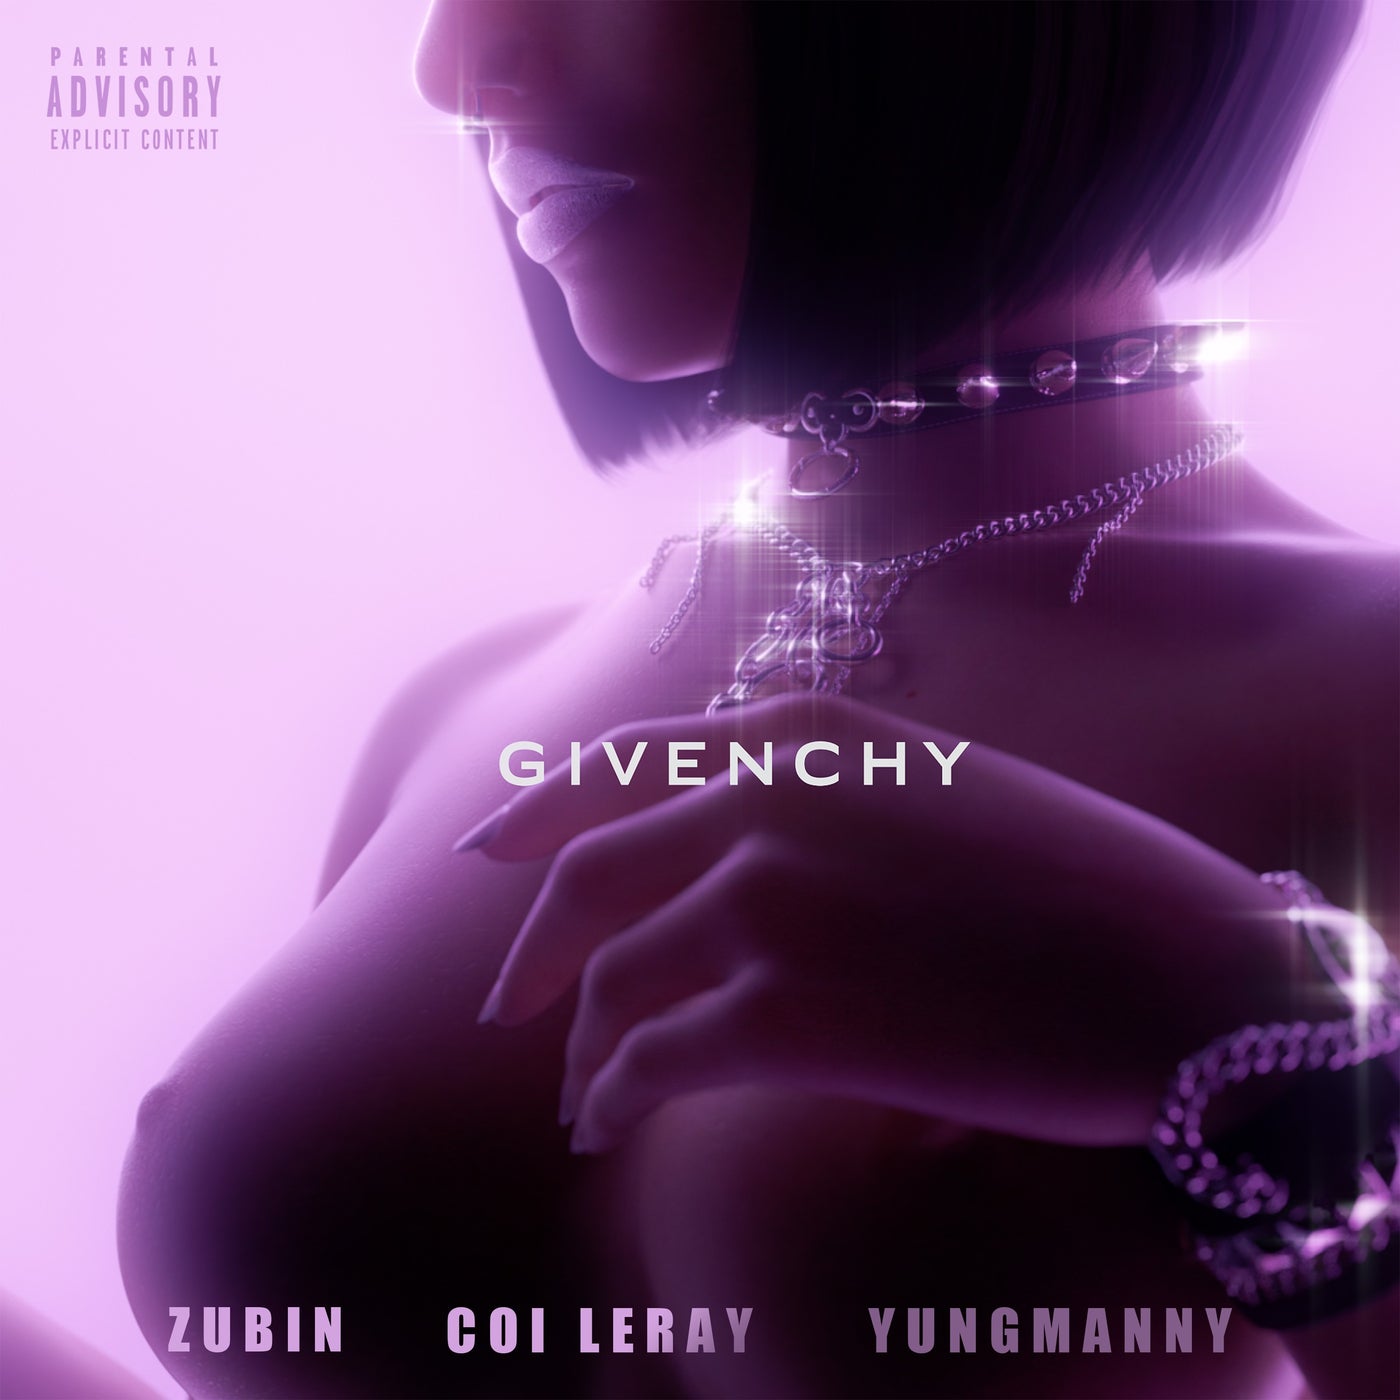 Givenchy by Coi Leray, Zubin and YungManny on Beatsource